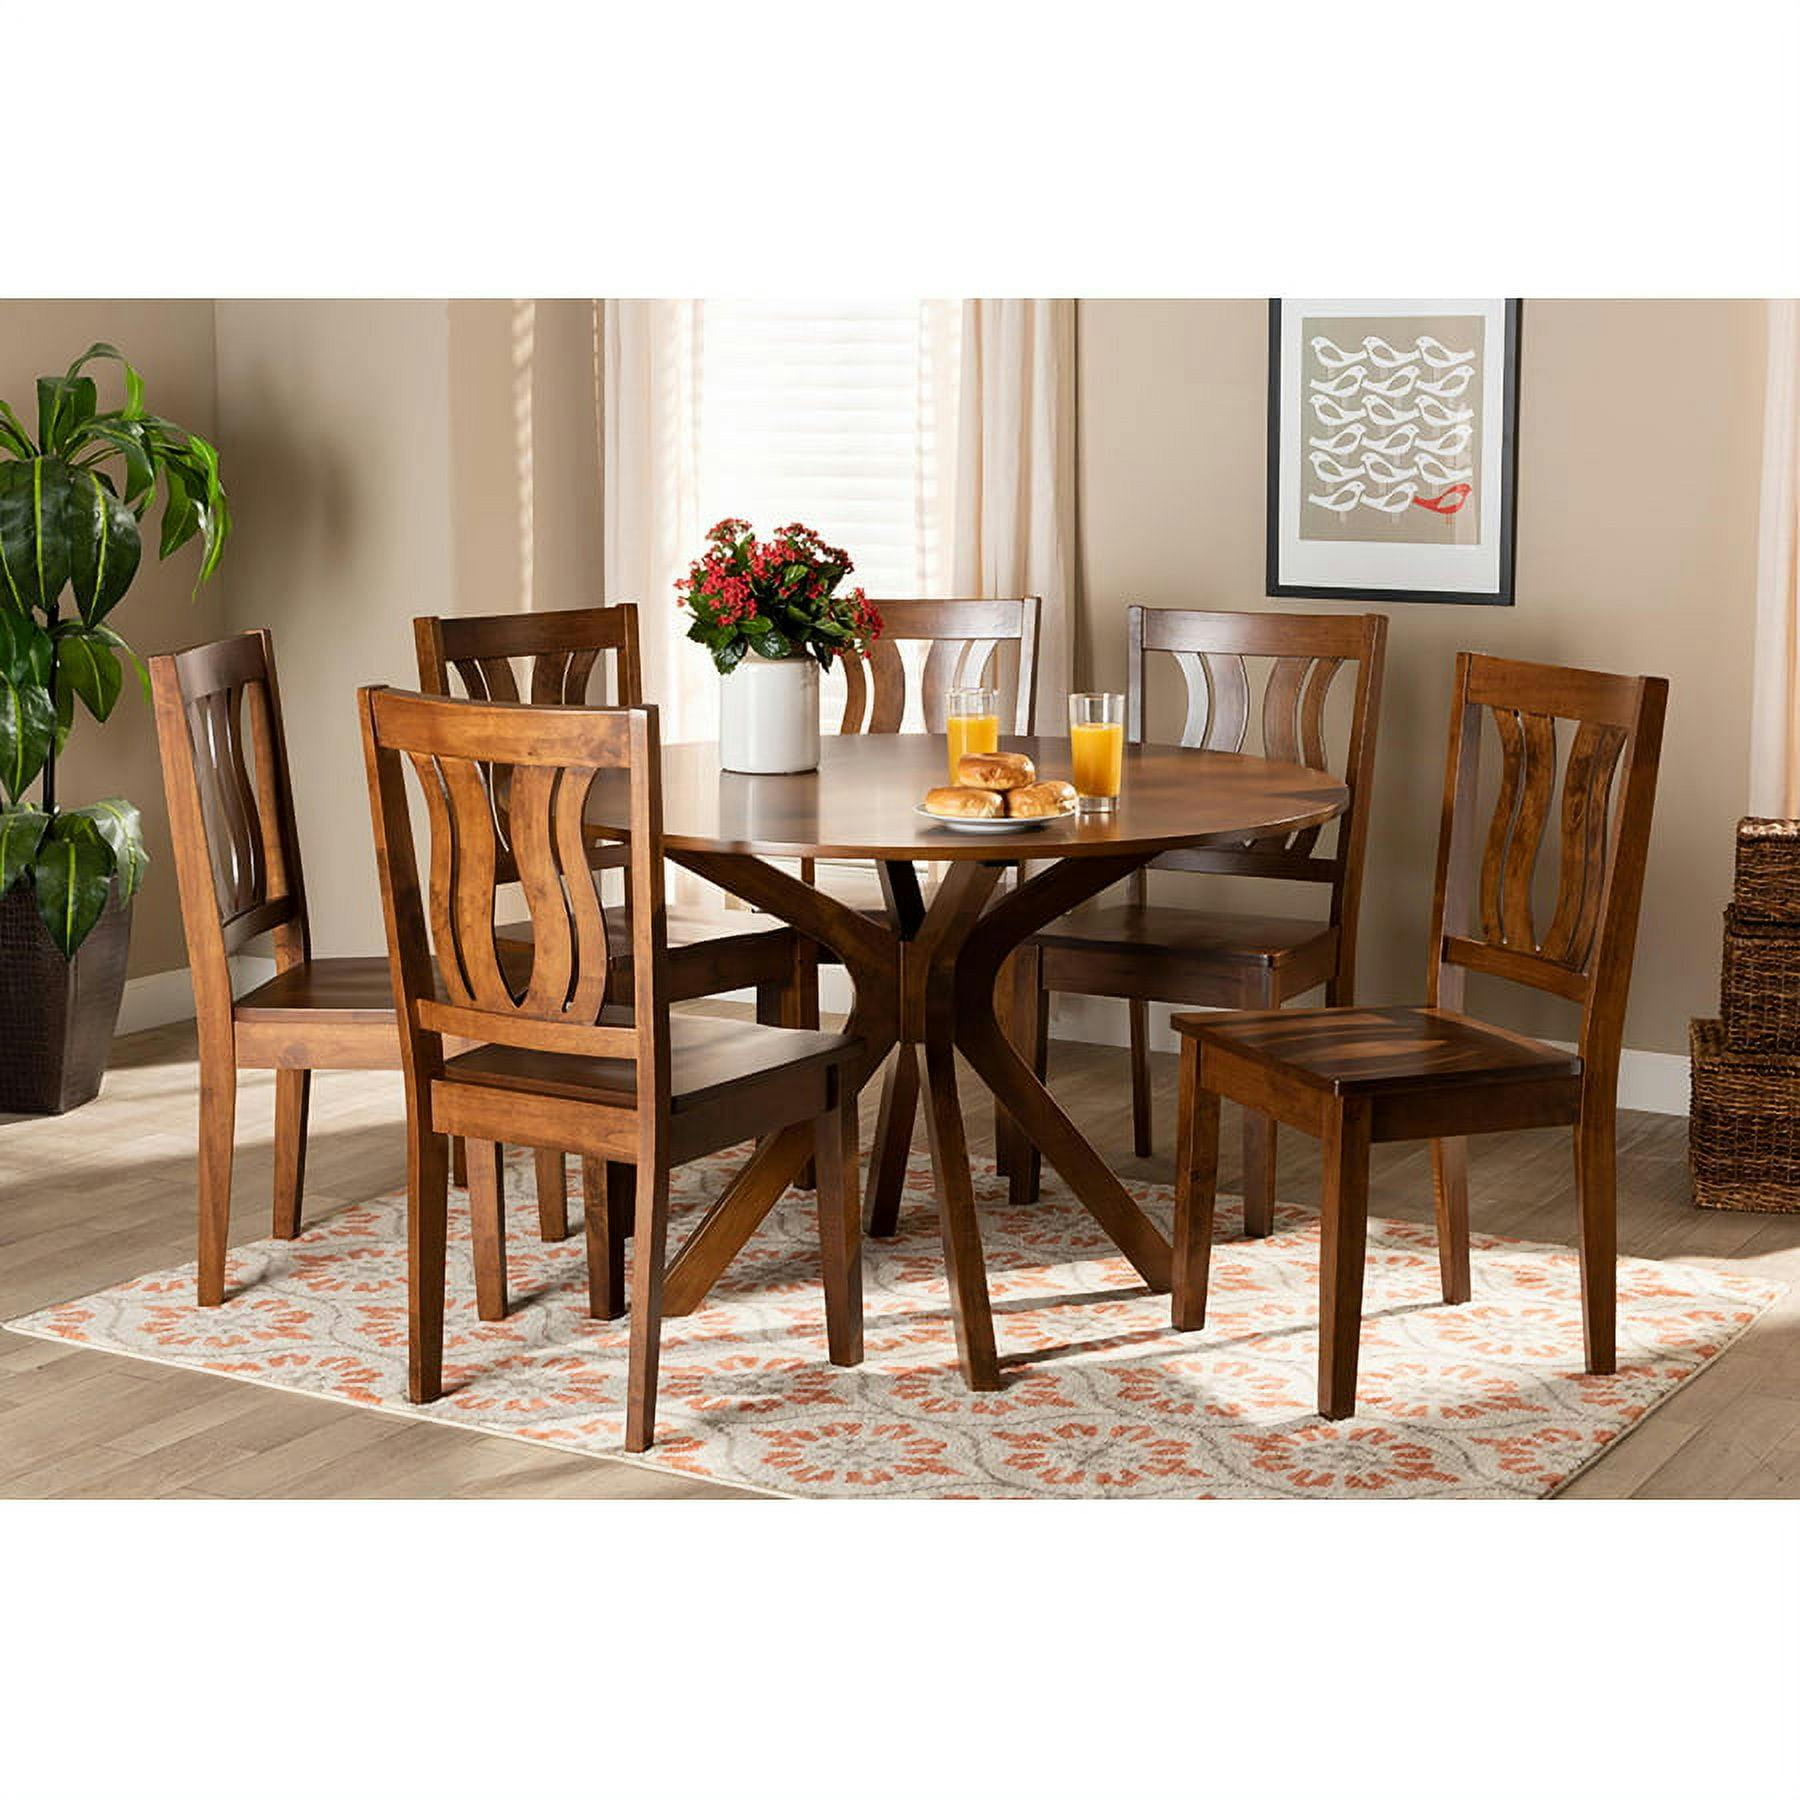 Walnut Brown Geometric Cut-Out 7-Piece Dining Set with Scoop Seats